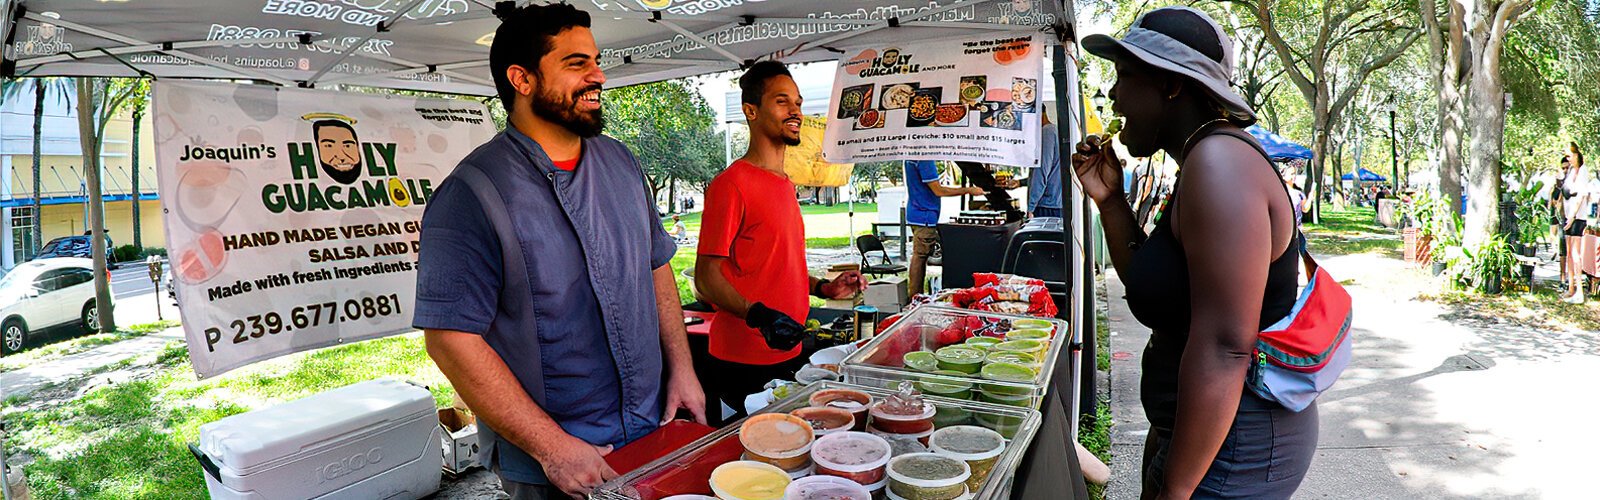 Joaquin Anaya of Joaquin’s Holy Guacamole is all smiles as a customer samples his vegan green dip handmade with fresh ingredients and no preservatives.